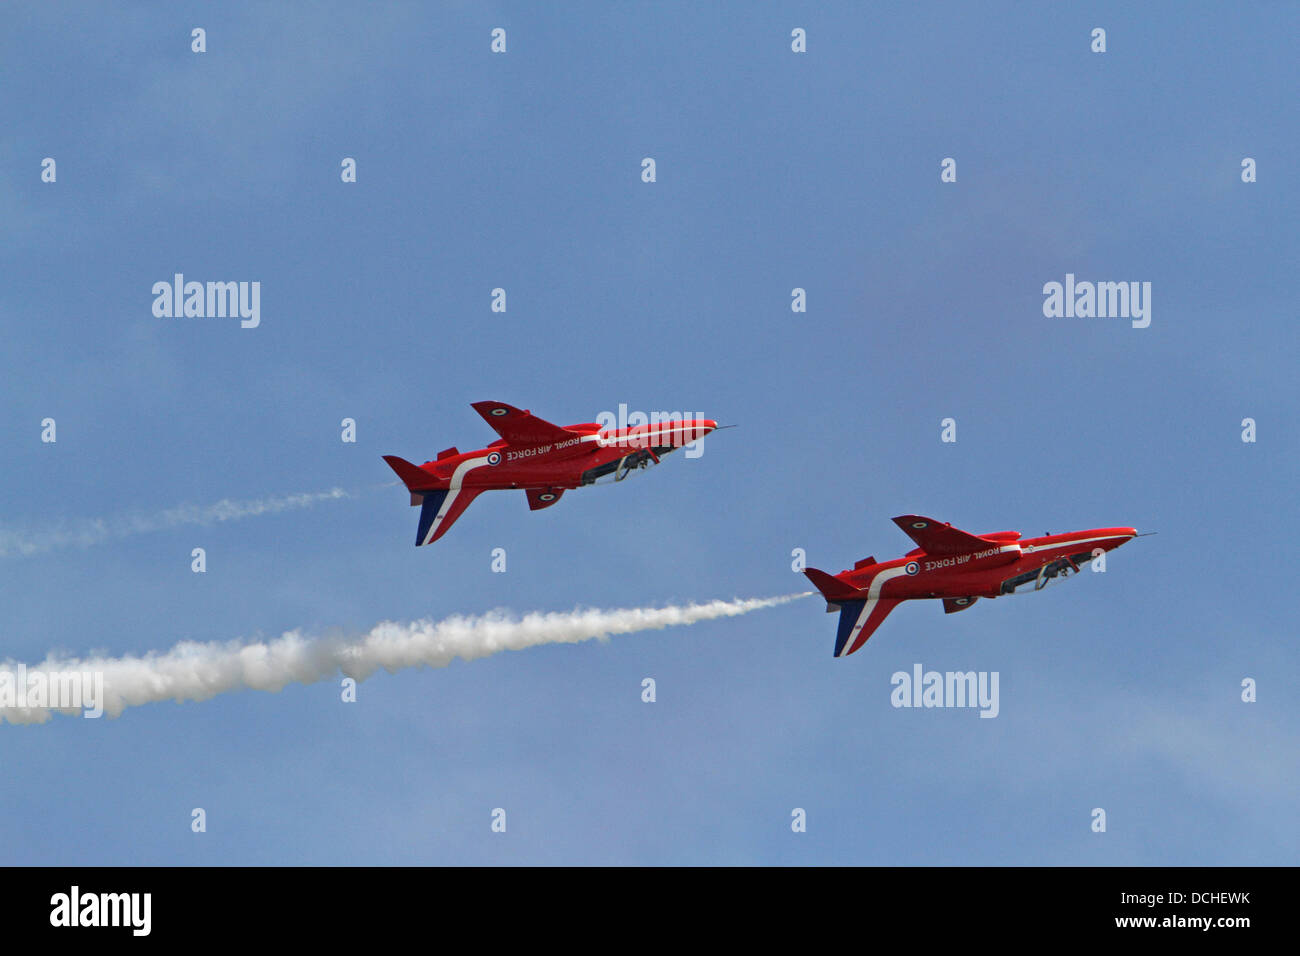 Eastbourne,UK,18th August 2013,The Red Arrows fly upside down over the pier in the sunshine during the Airbourne air display in Eastbourn Credit: Keith Larby/Alamy live News Stock Photo